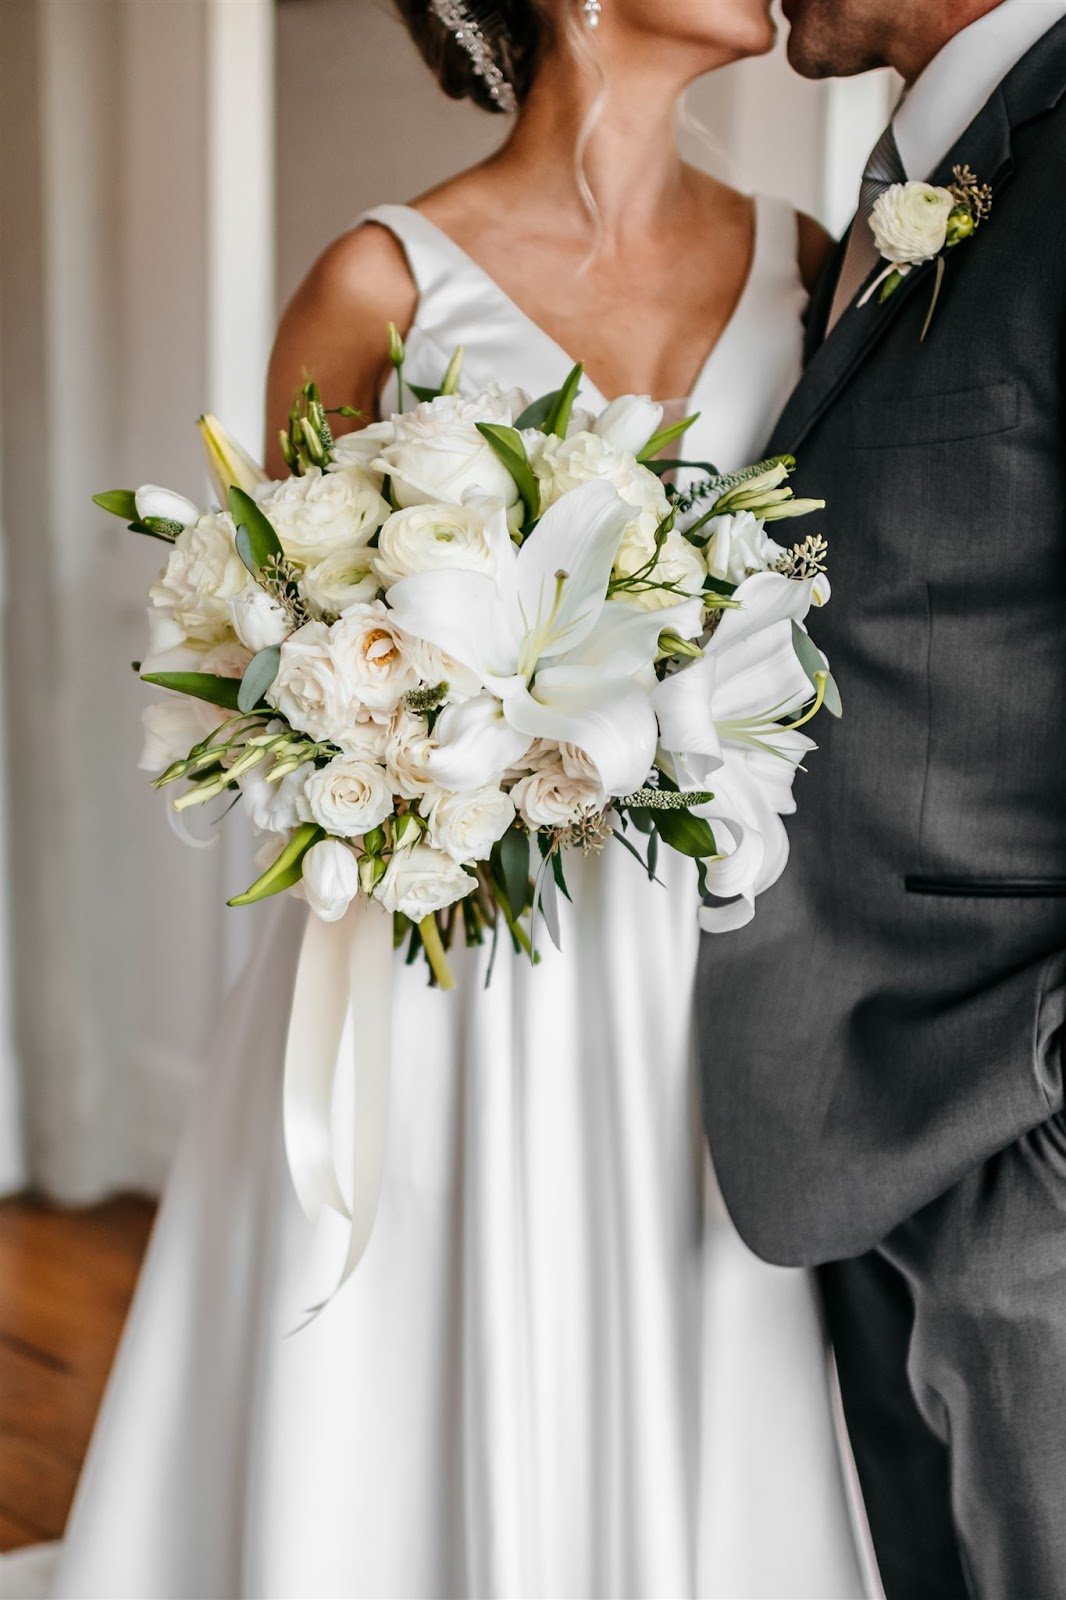 white and green bridal bouquet with lilies.jpeg